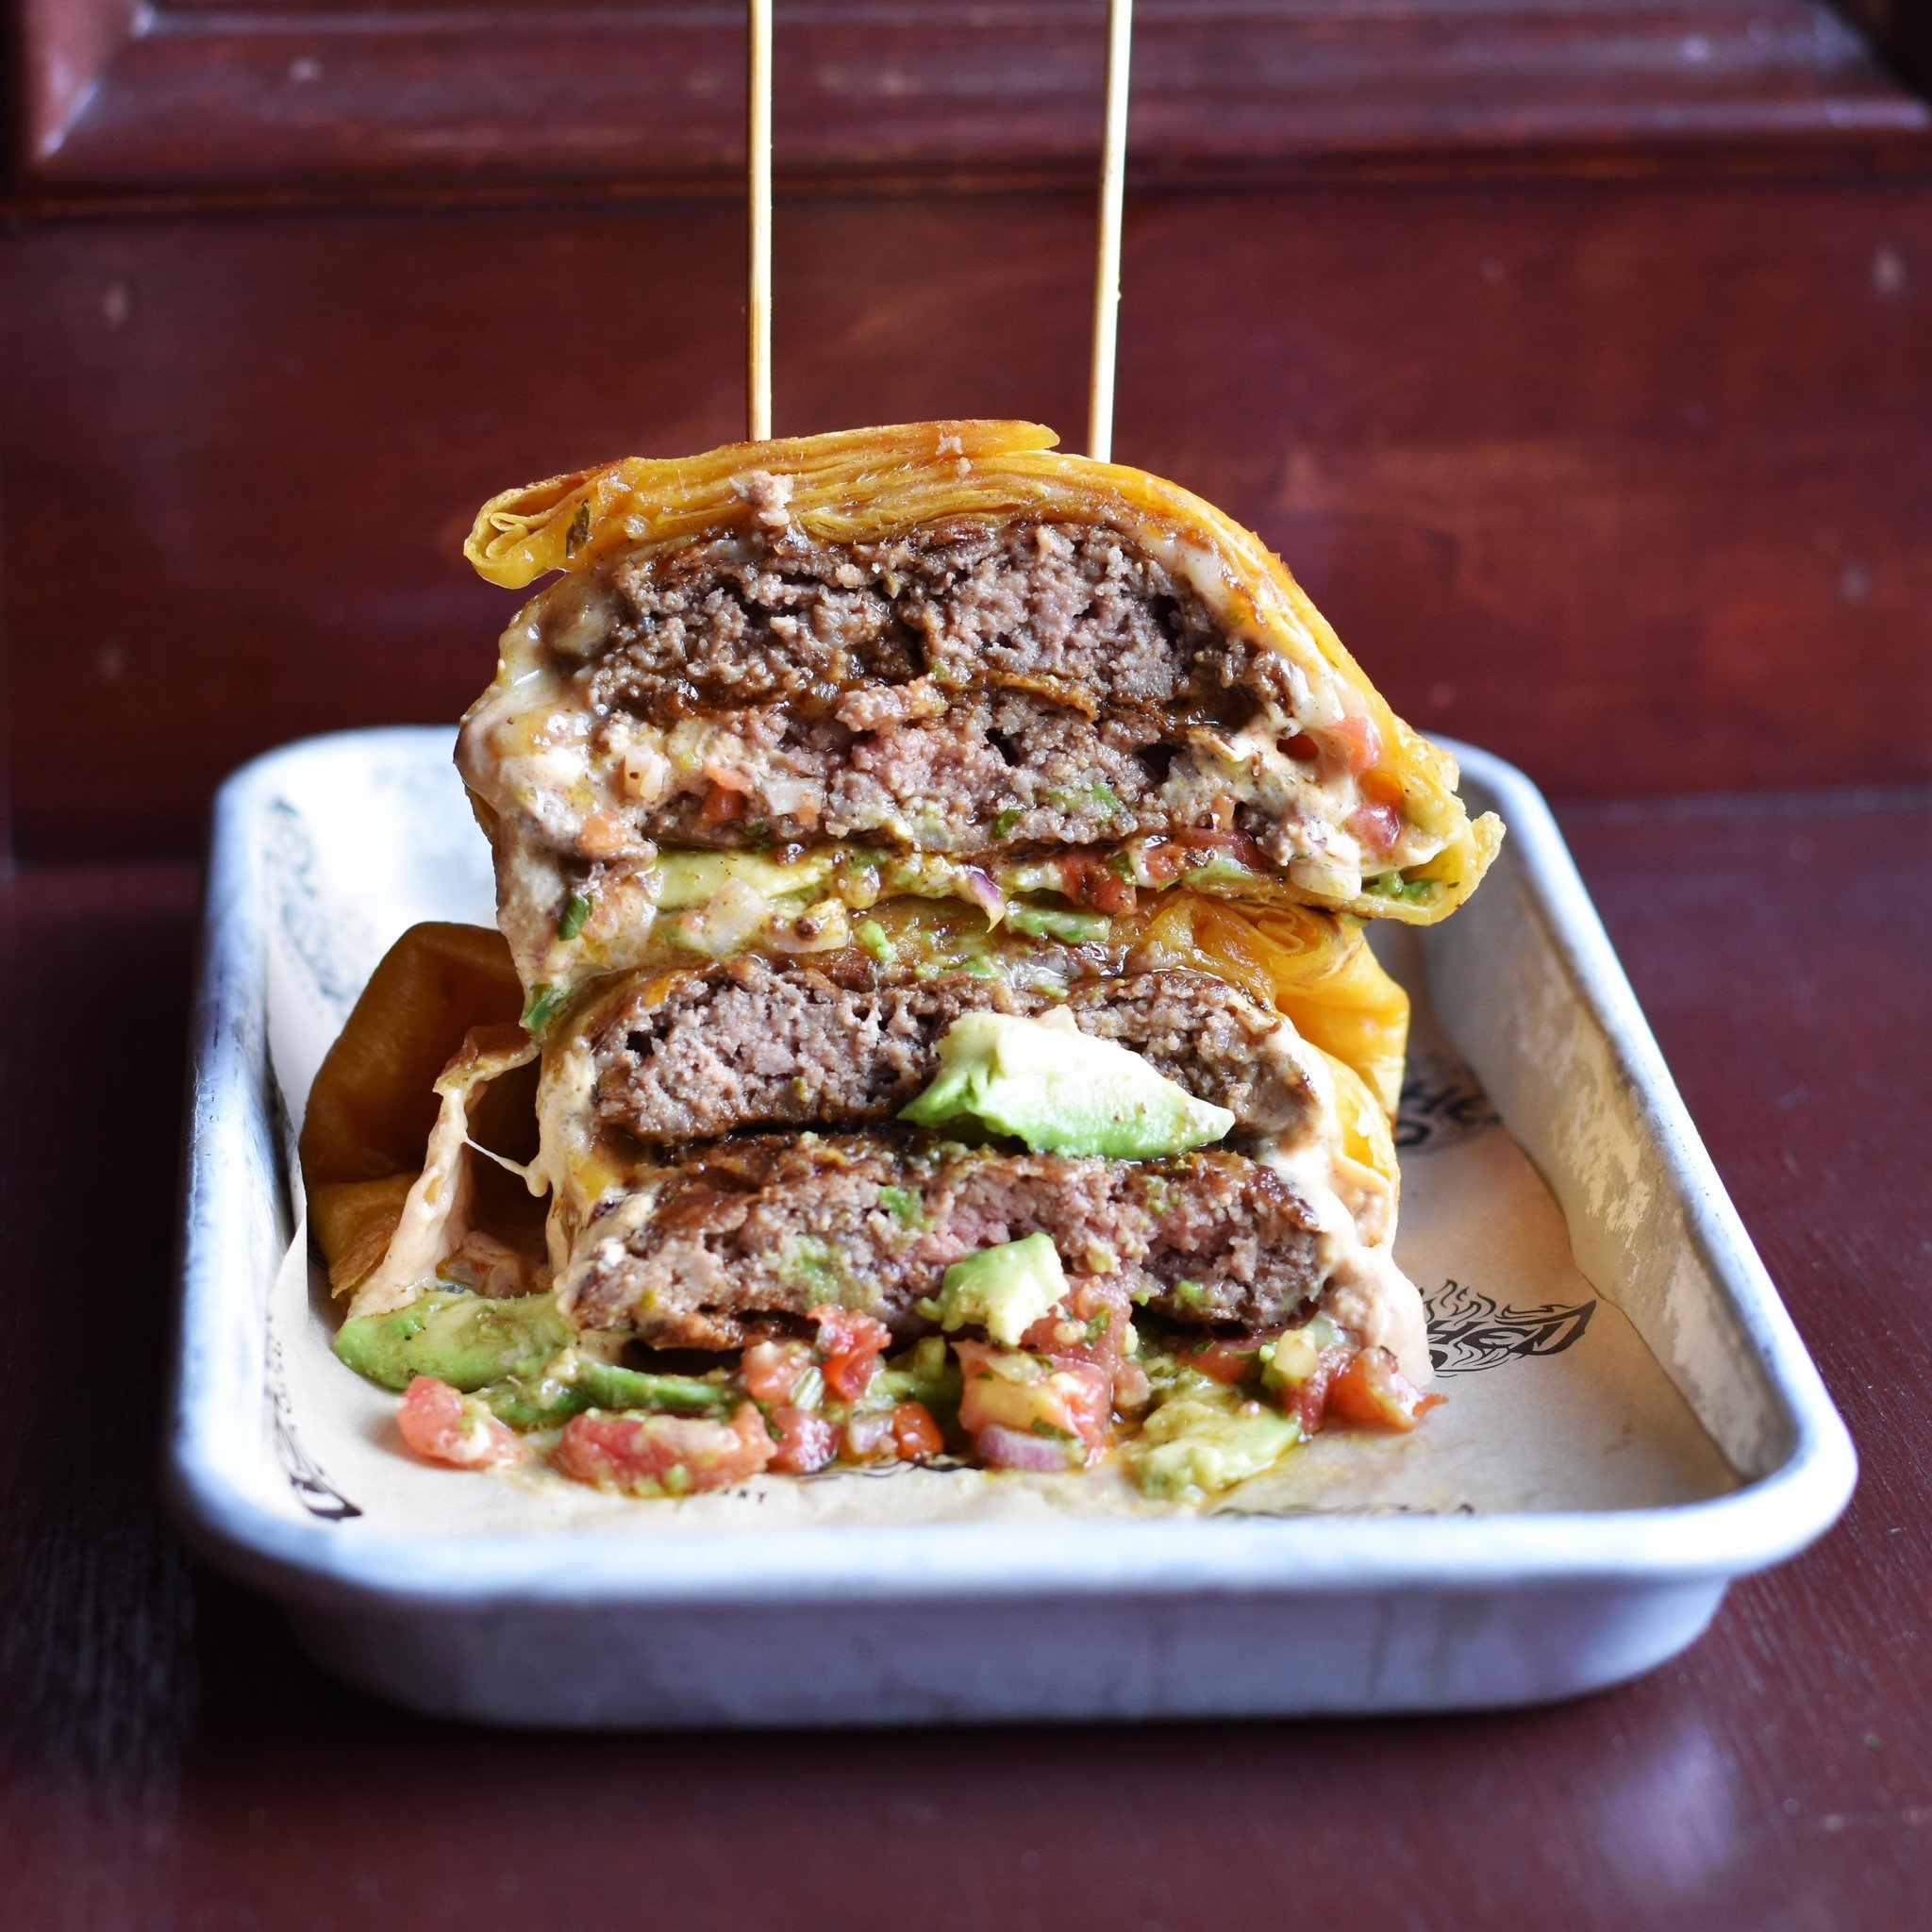 &ldquo;Get off Napoleon and make yourself a dang quesadilla!&rdquo;

Happy Burger Monday!! 

Today we&rsquo;re featuring a Quesadilla Burger. Double Patties topped with a Mexican Three Cheese Blend, Pico de Gallo, Avocado, and Chipotle Sour Cream. Al